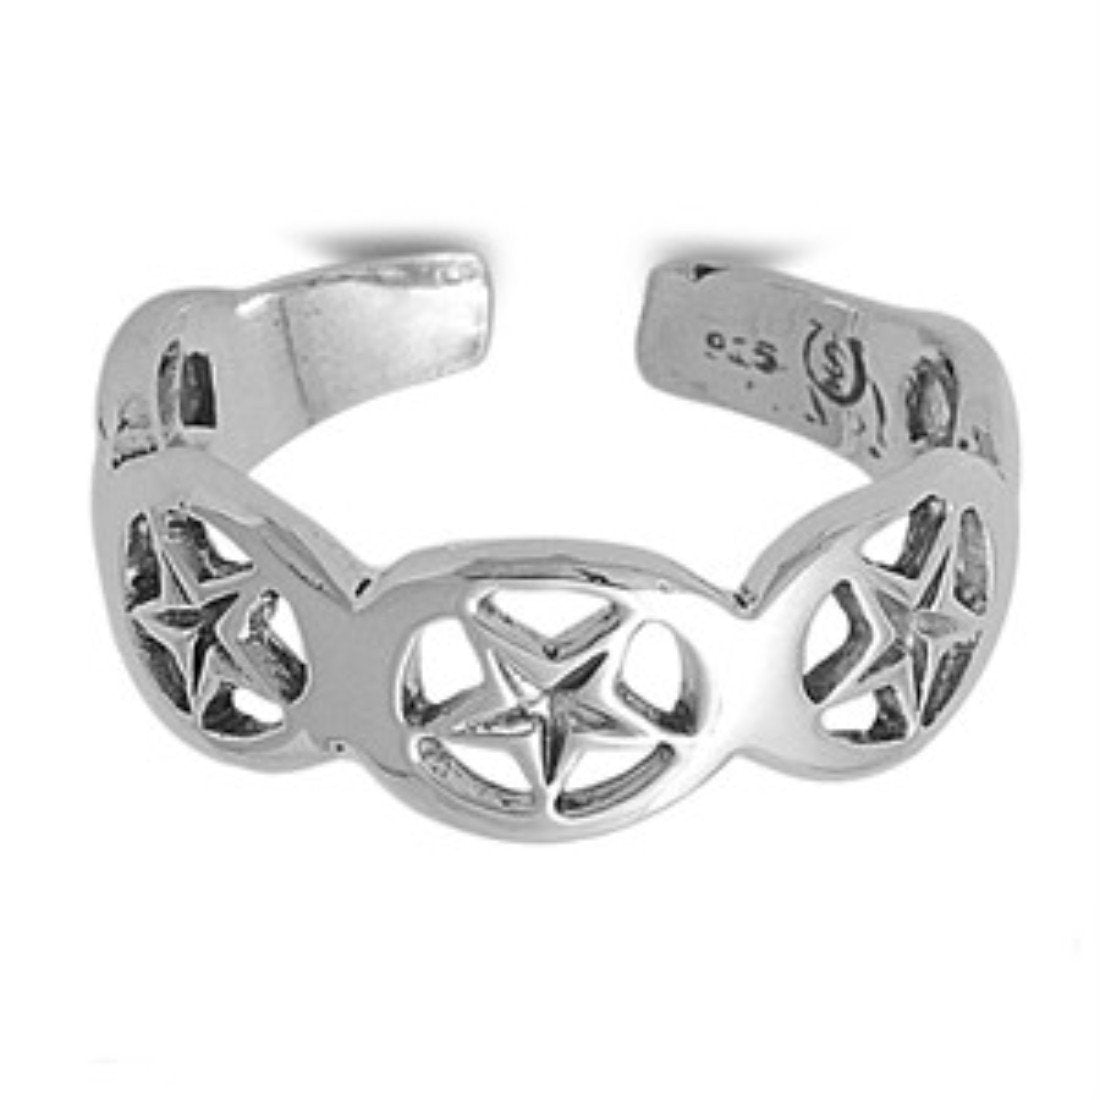 Star Silver Toe Ring Adjustable Band 925 Sterling Silver (5mm)